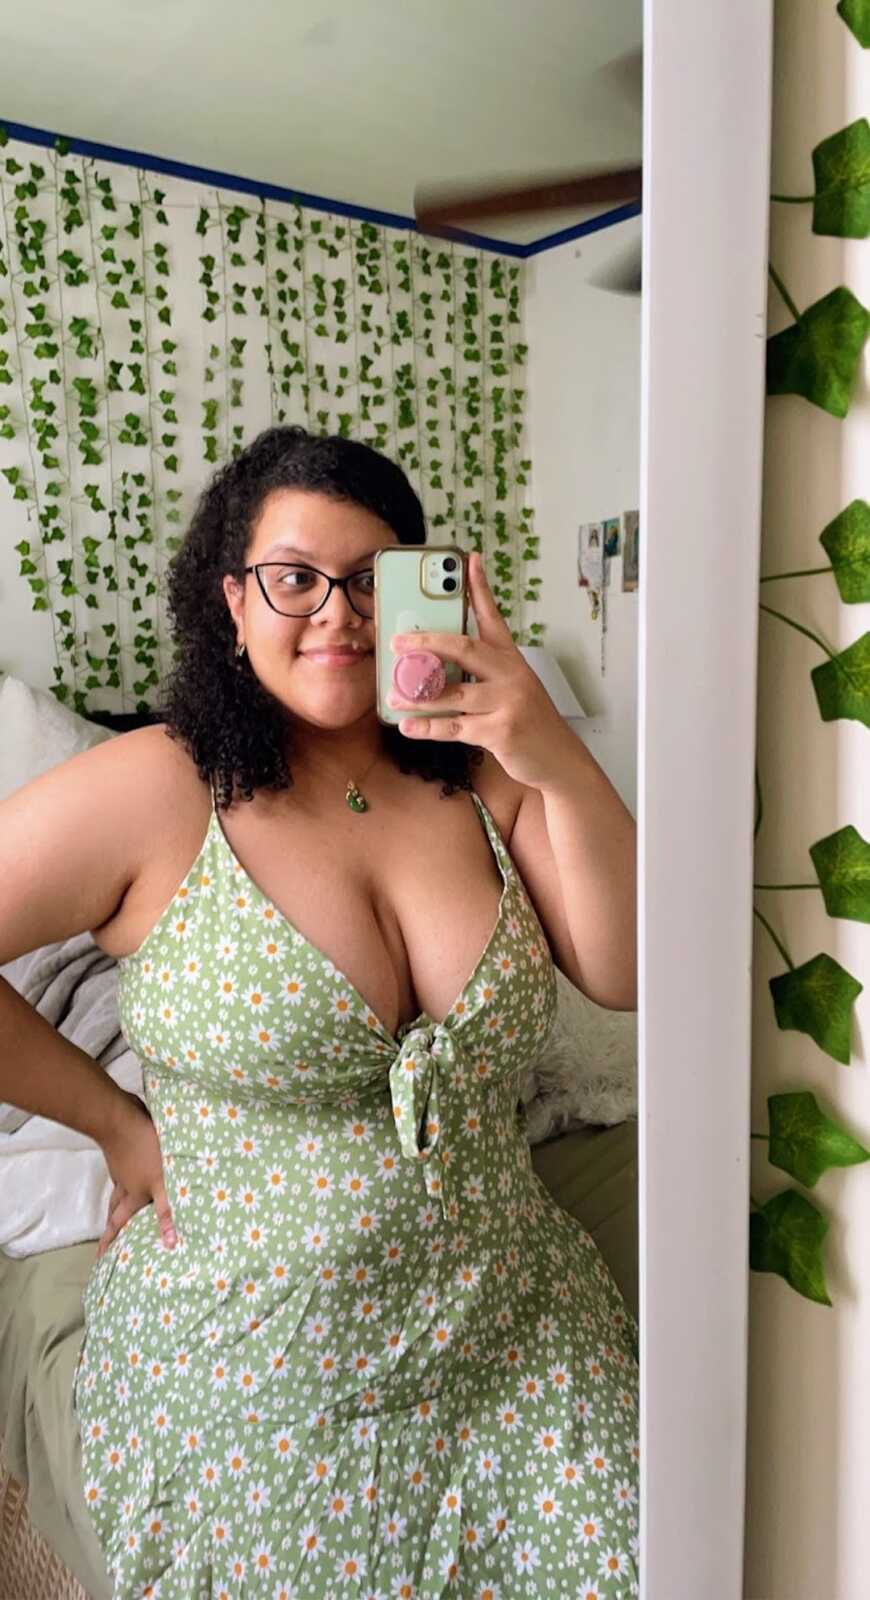 body positivity activist in green dress with white flowers taking a mirror selfie